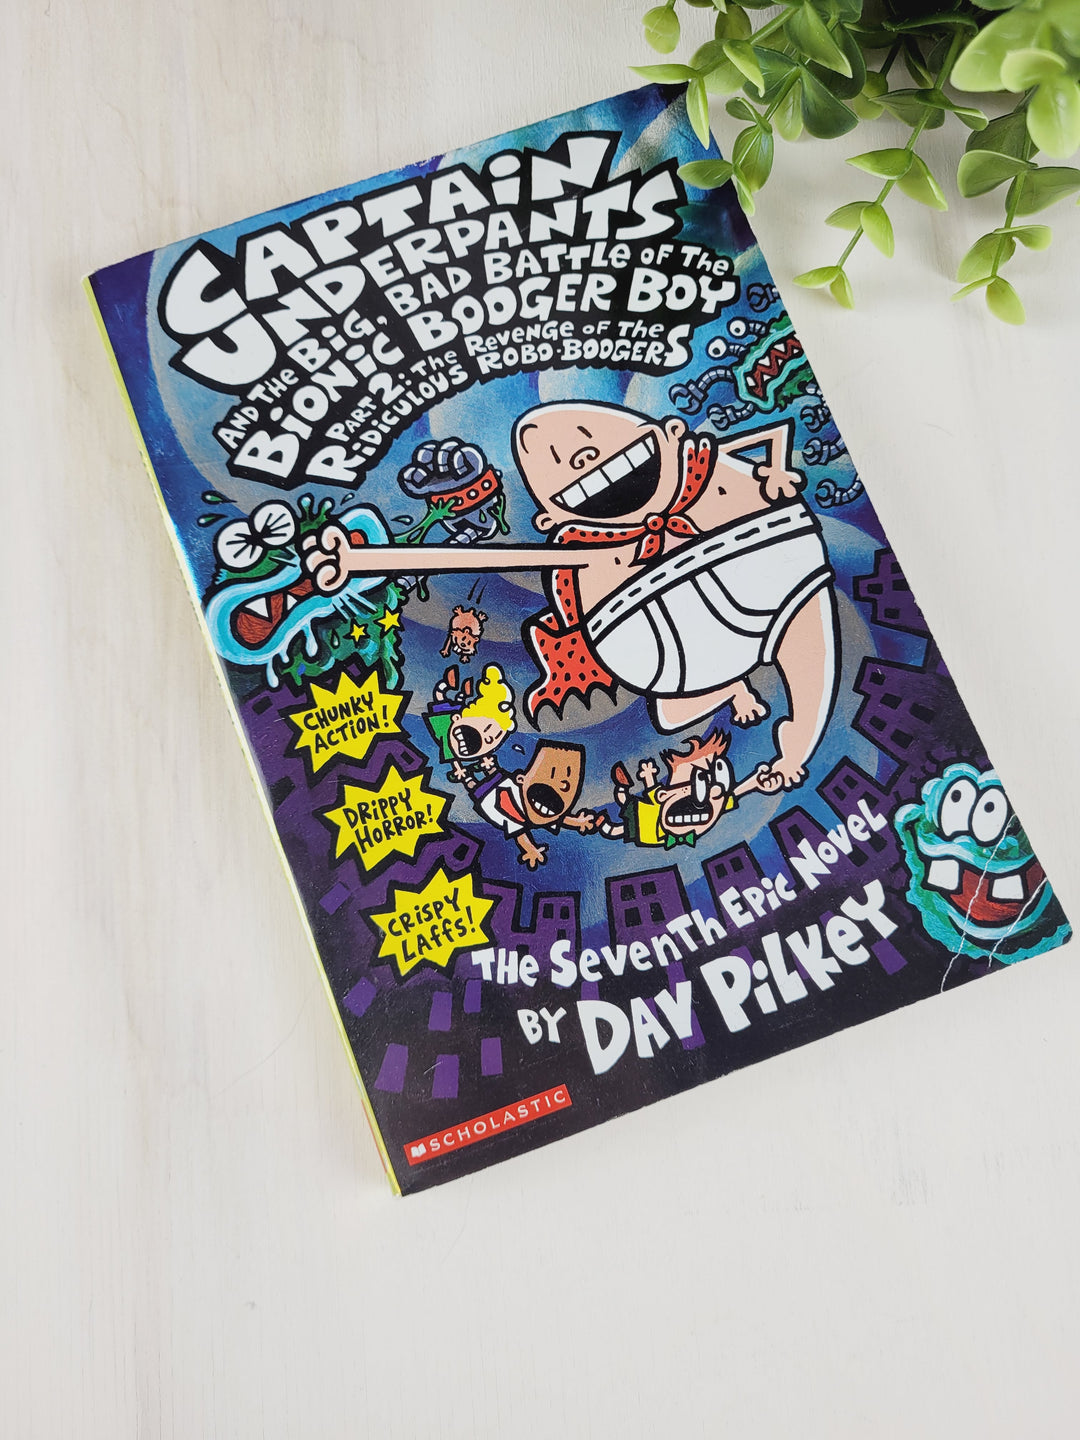 CAPTAIN UNDERPANTS- AND THE BIG BAD BATTLE OF THE BIONIC BOOGER BOY PART 2 REVENGE OF THE RIDICULOUS ROBO-BOOGERS SOFTCOVER VGUC/EUC